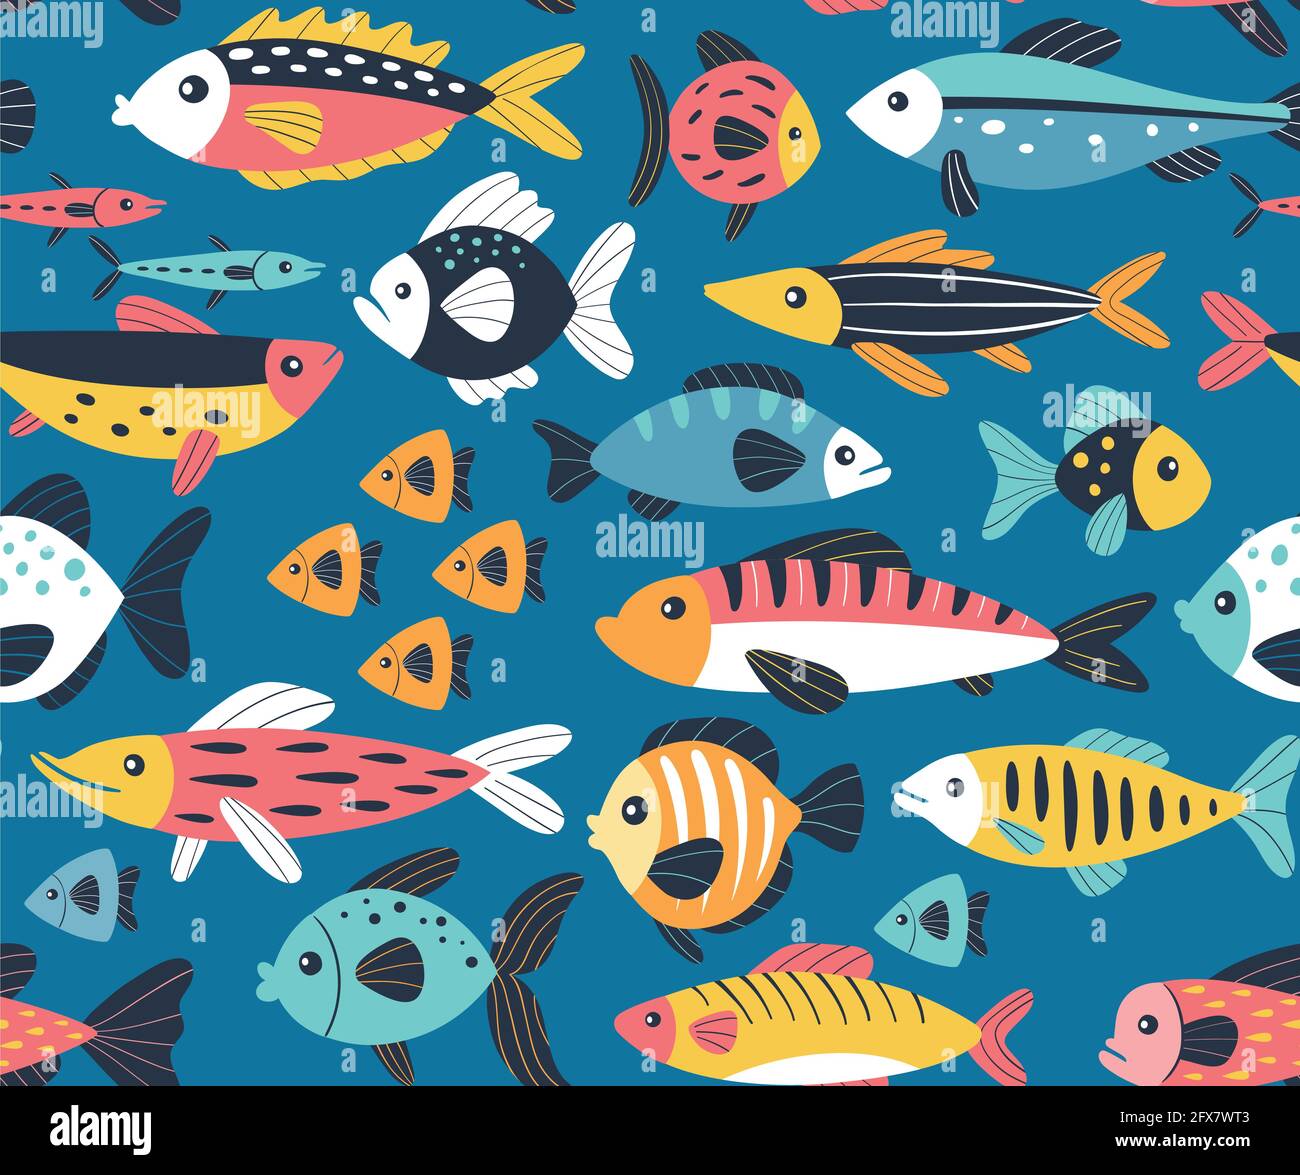 Swimming fishes seamless pattern. Sealife concept. Colorful hand drawn vector illustration on blue background. Stock Vector